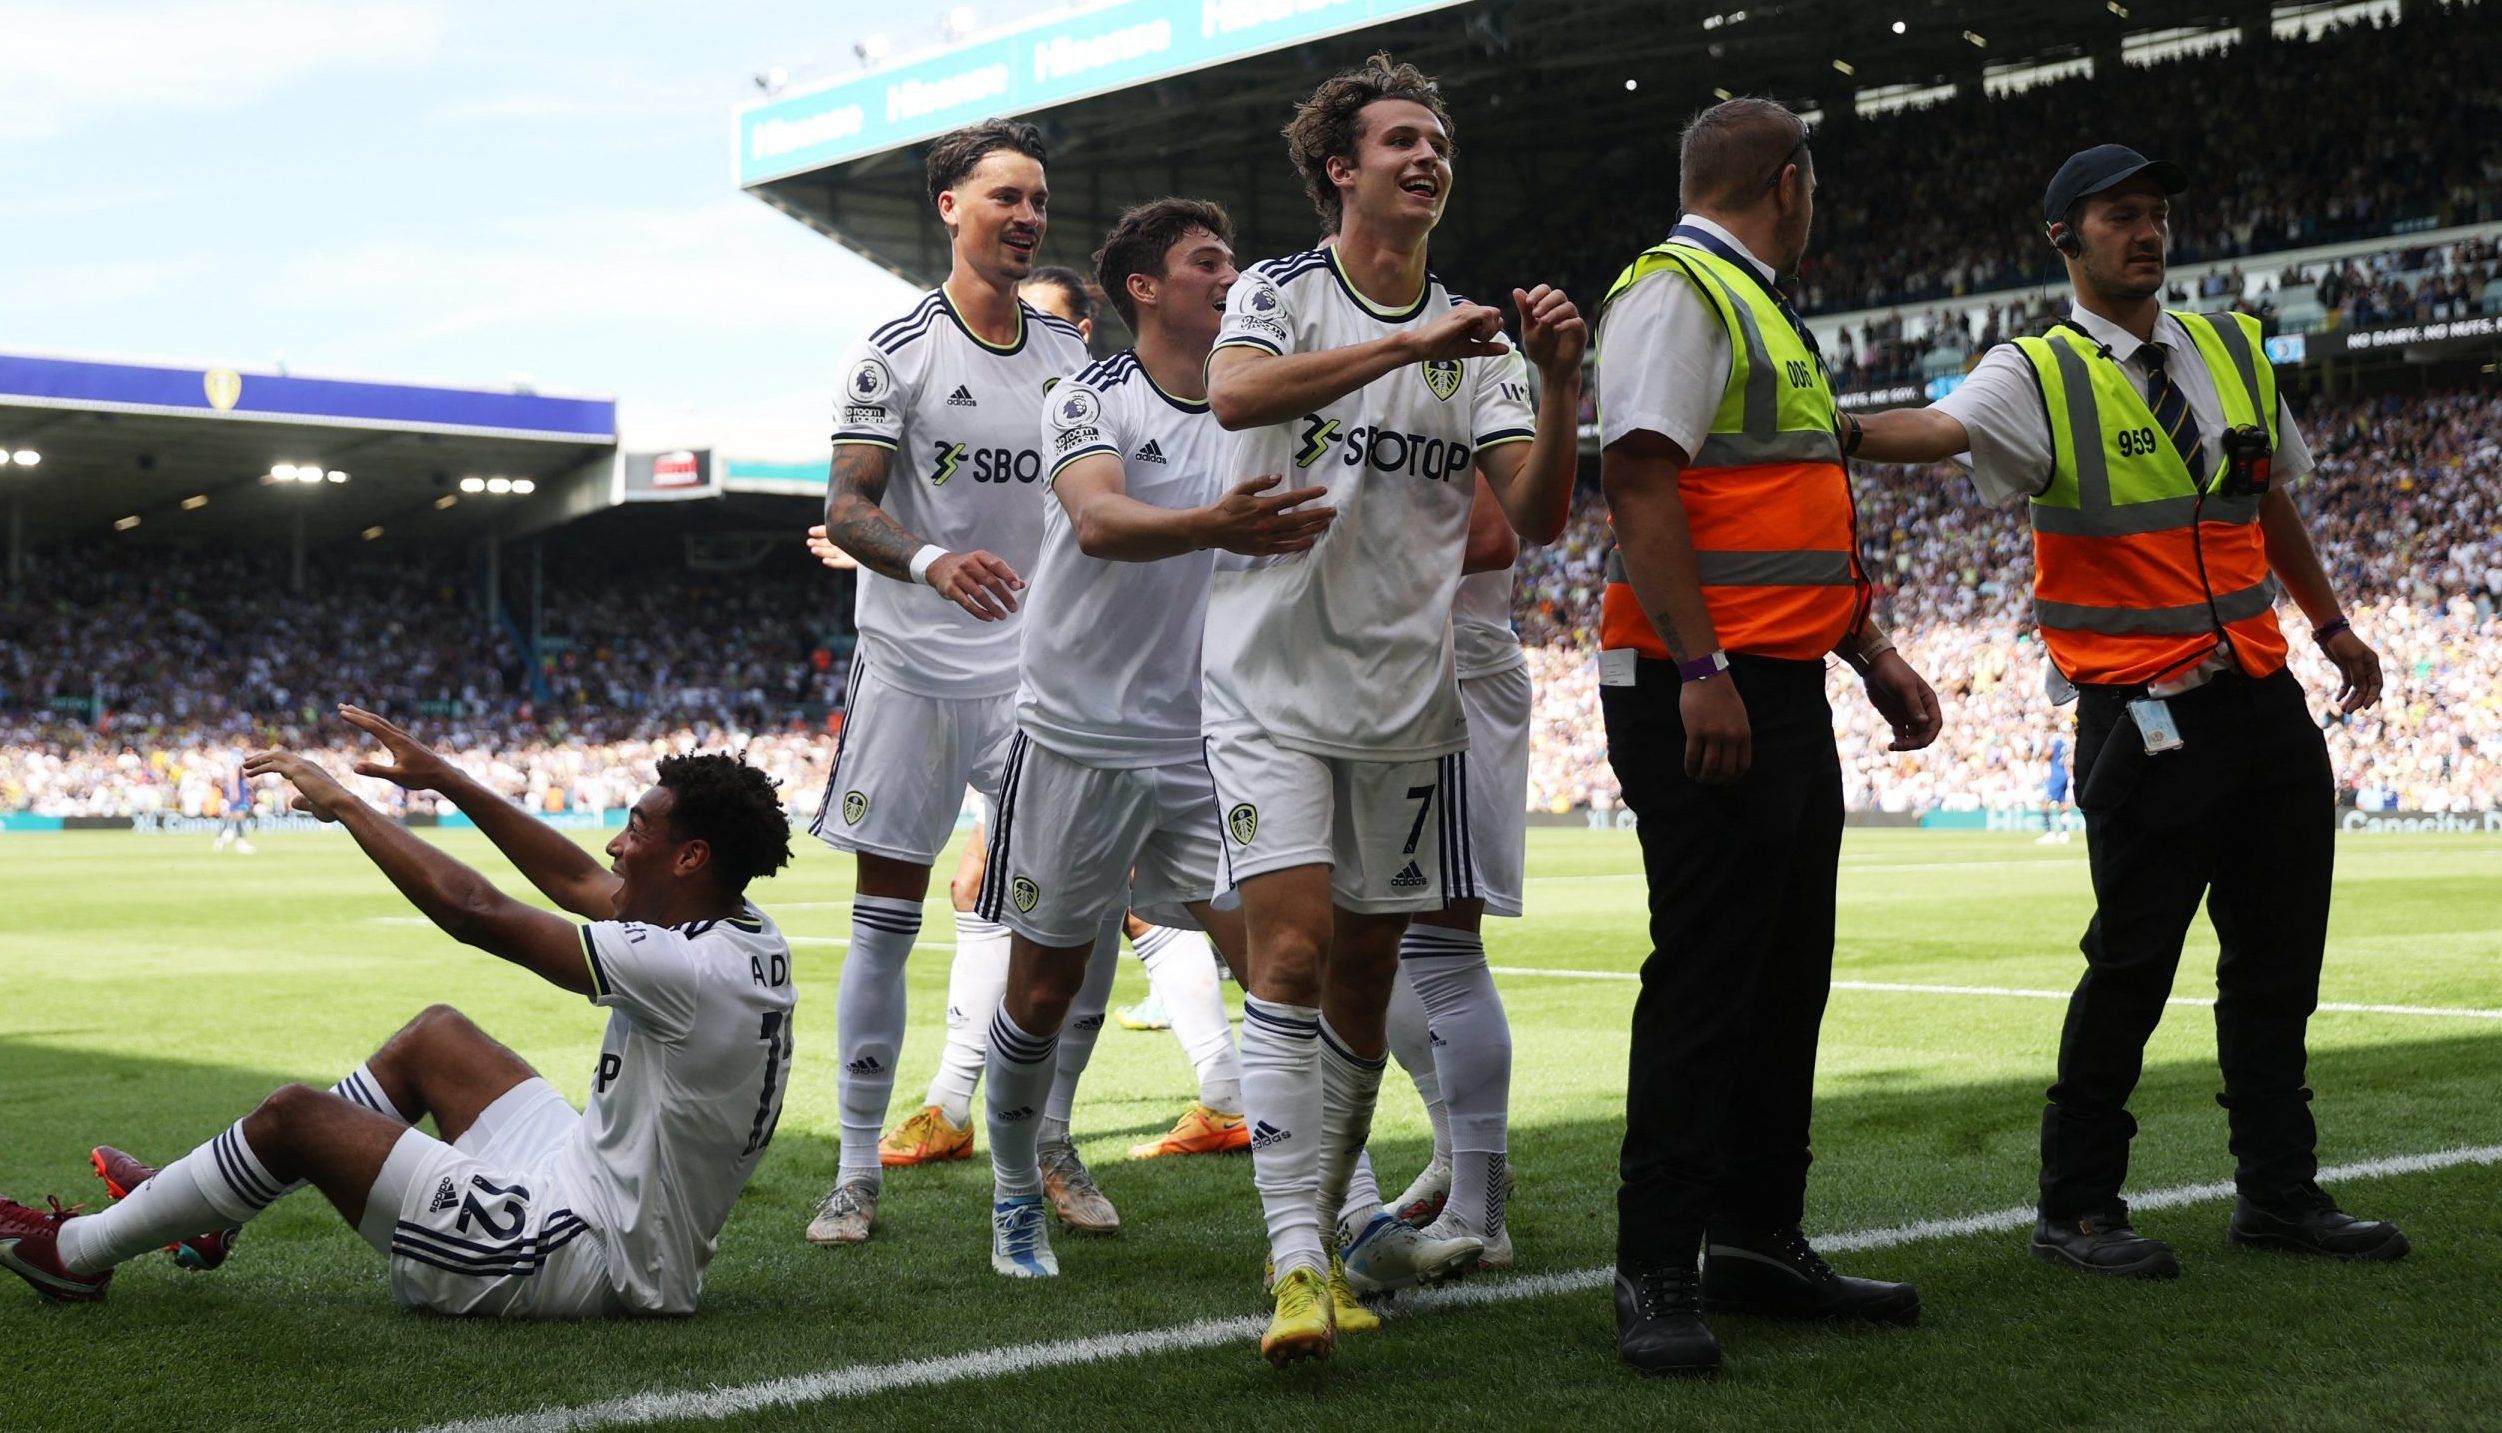 Leeds United's Brenden Aaronson celebrates scoring their first goal with teammates